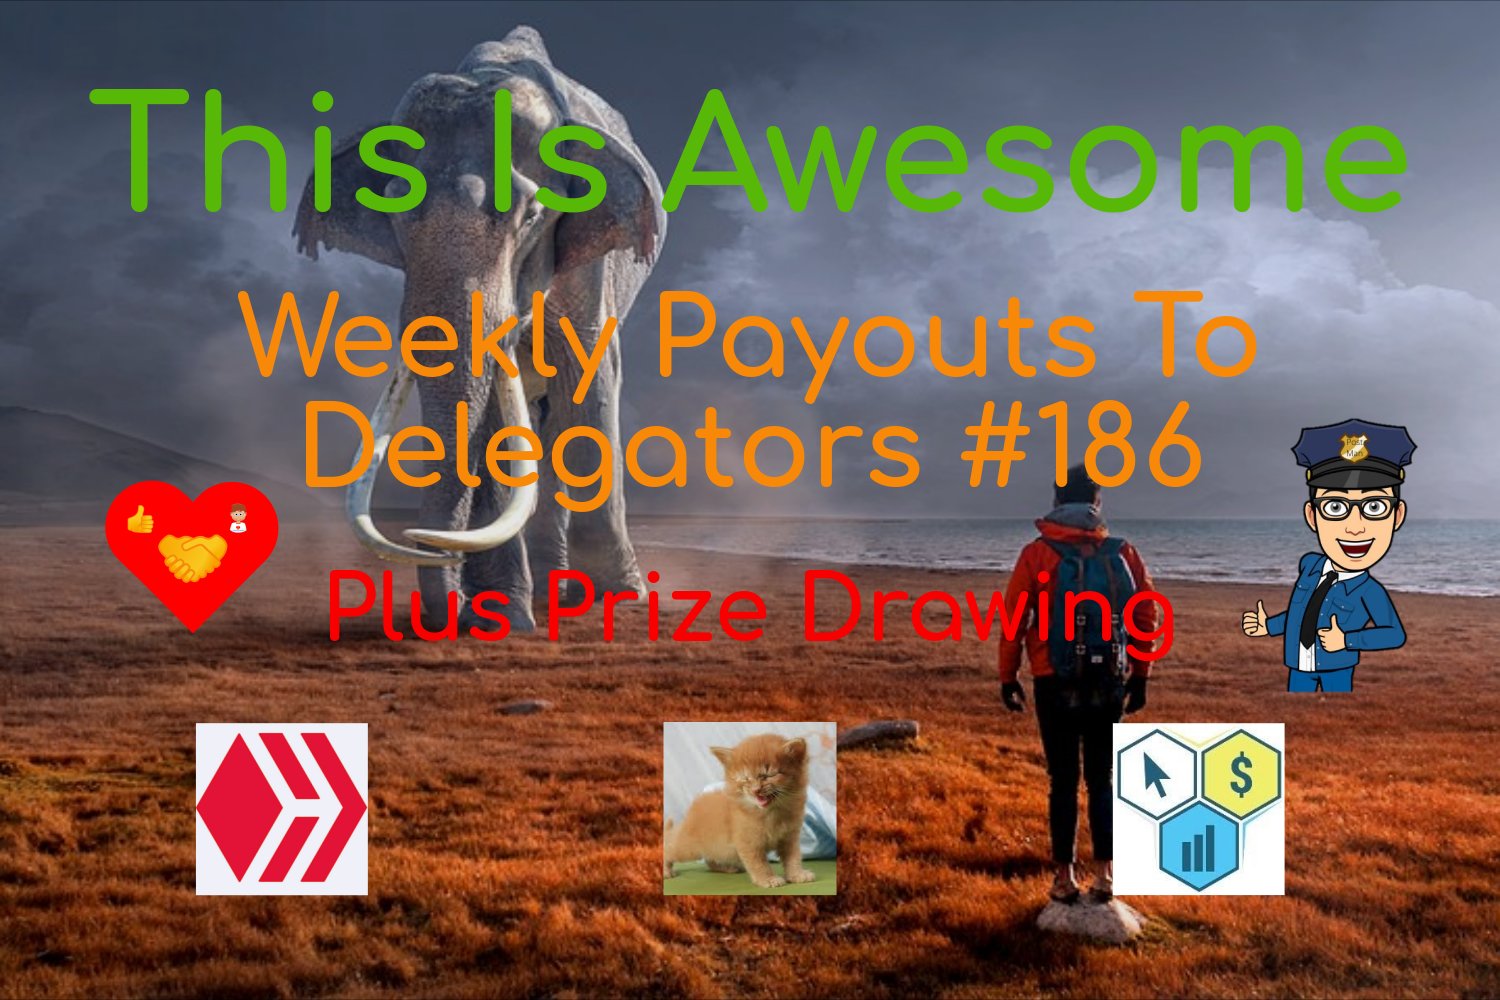 @thisisawesome/this-is-awesome-weekly-payouts-to-delegators-186-plus-prize-drawing